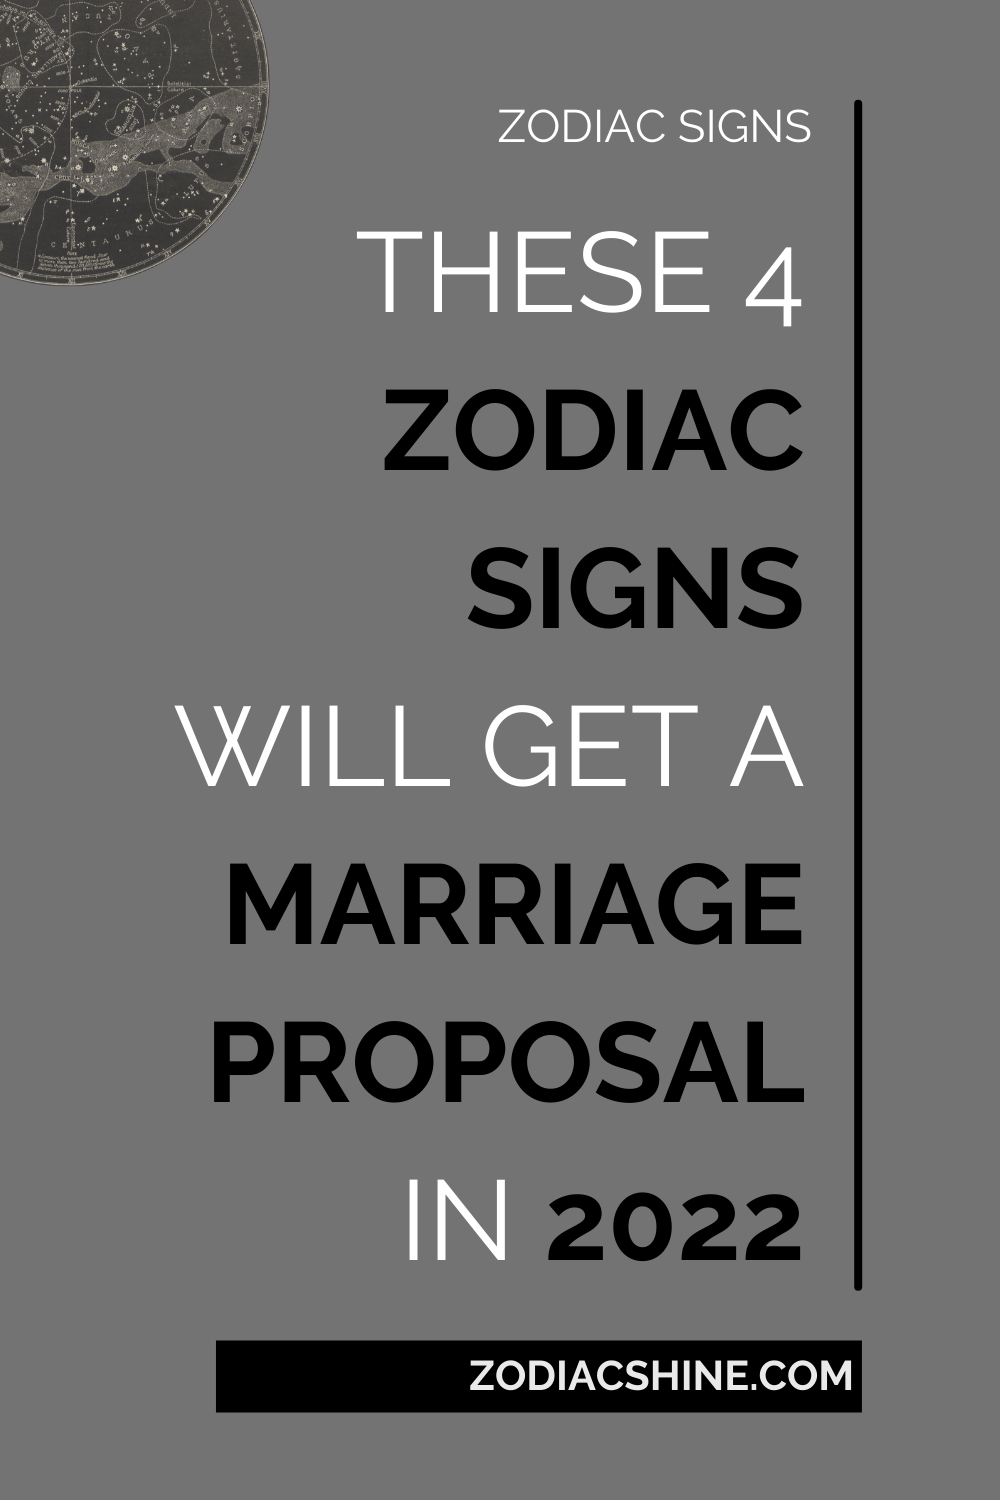 These 4 Zodiac Signs Will Get A Marriage Proposal In 2022